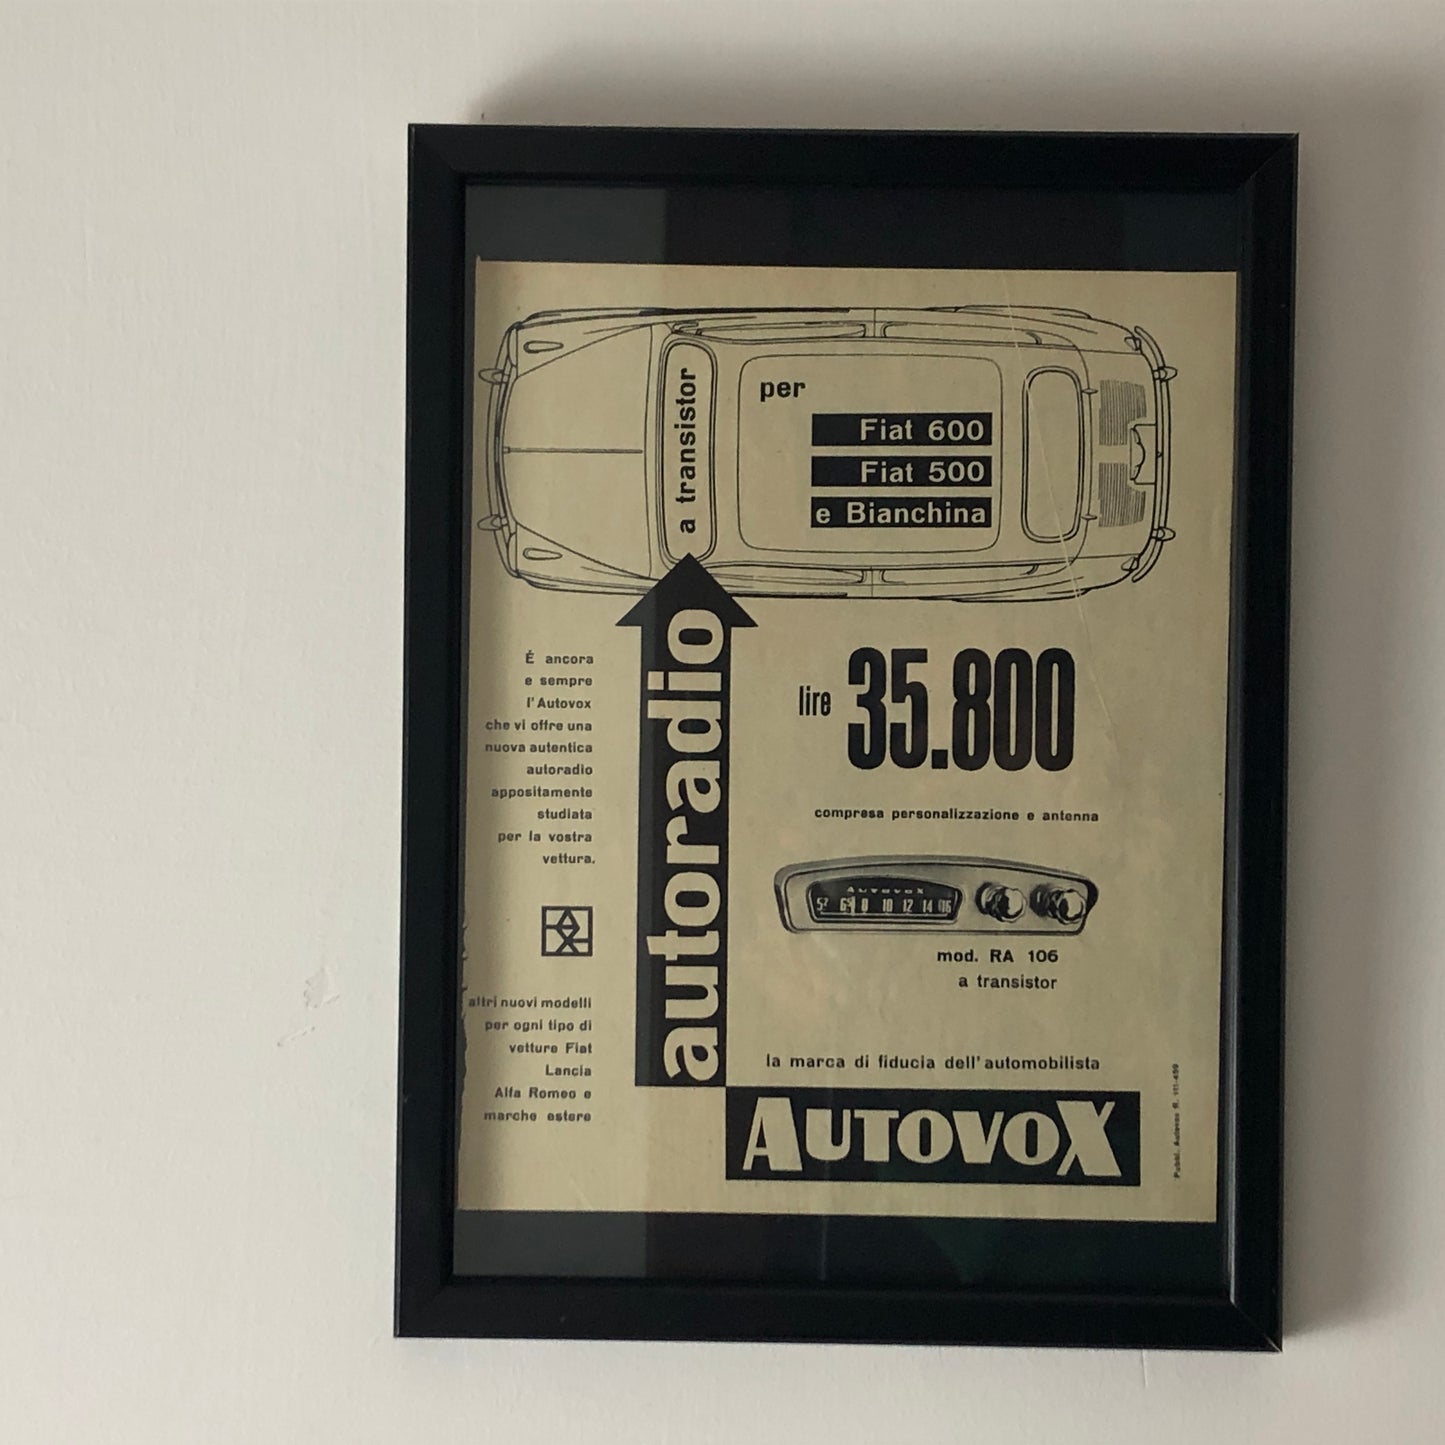 Autovox, 1959 Autovox Car Radio Advertising for Fiat 600 Fiat 500 and Bianchina